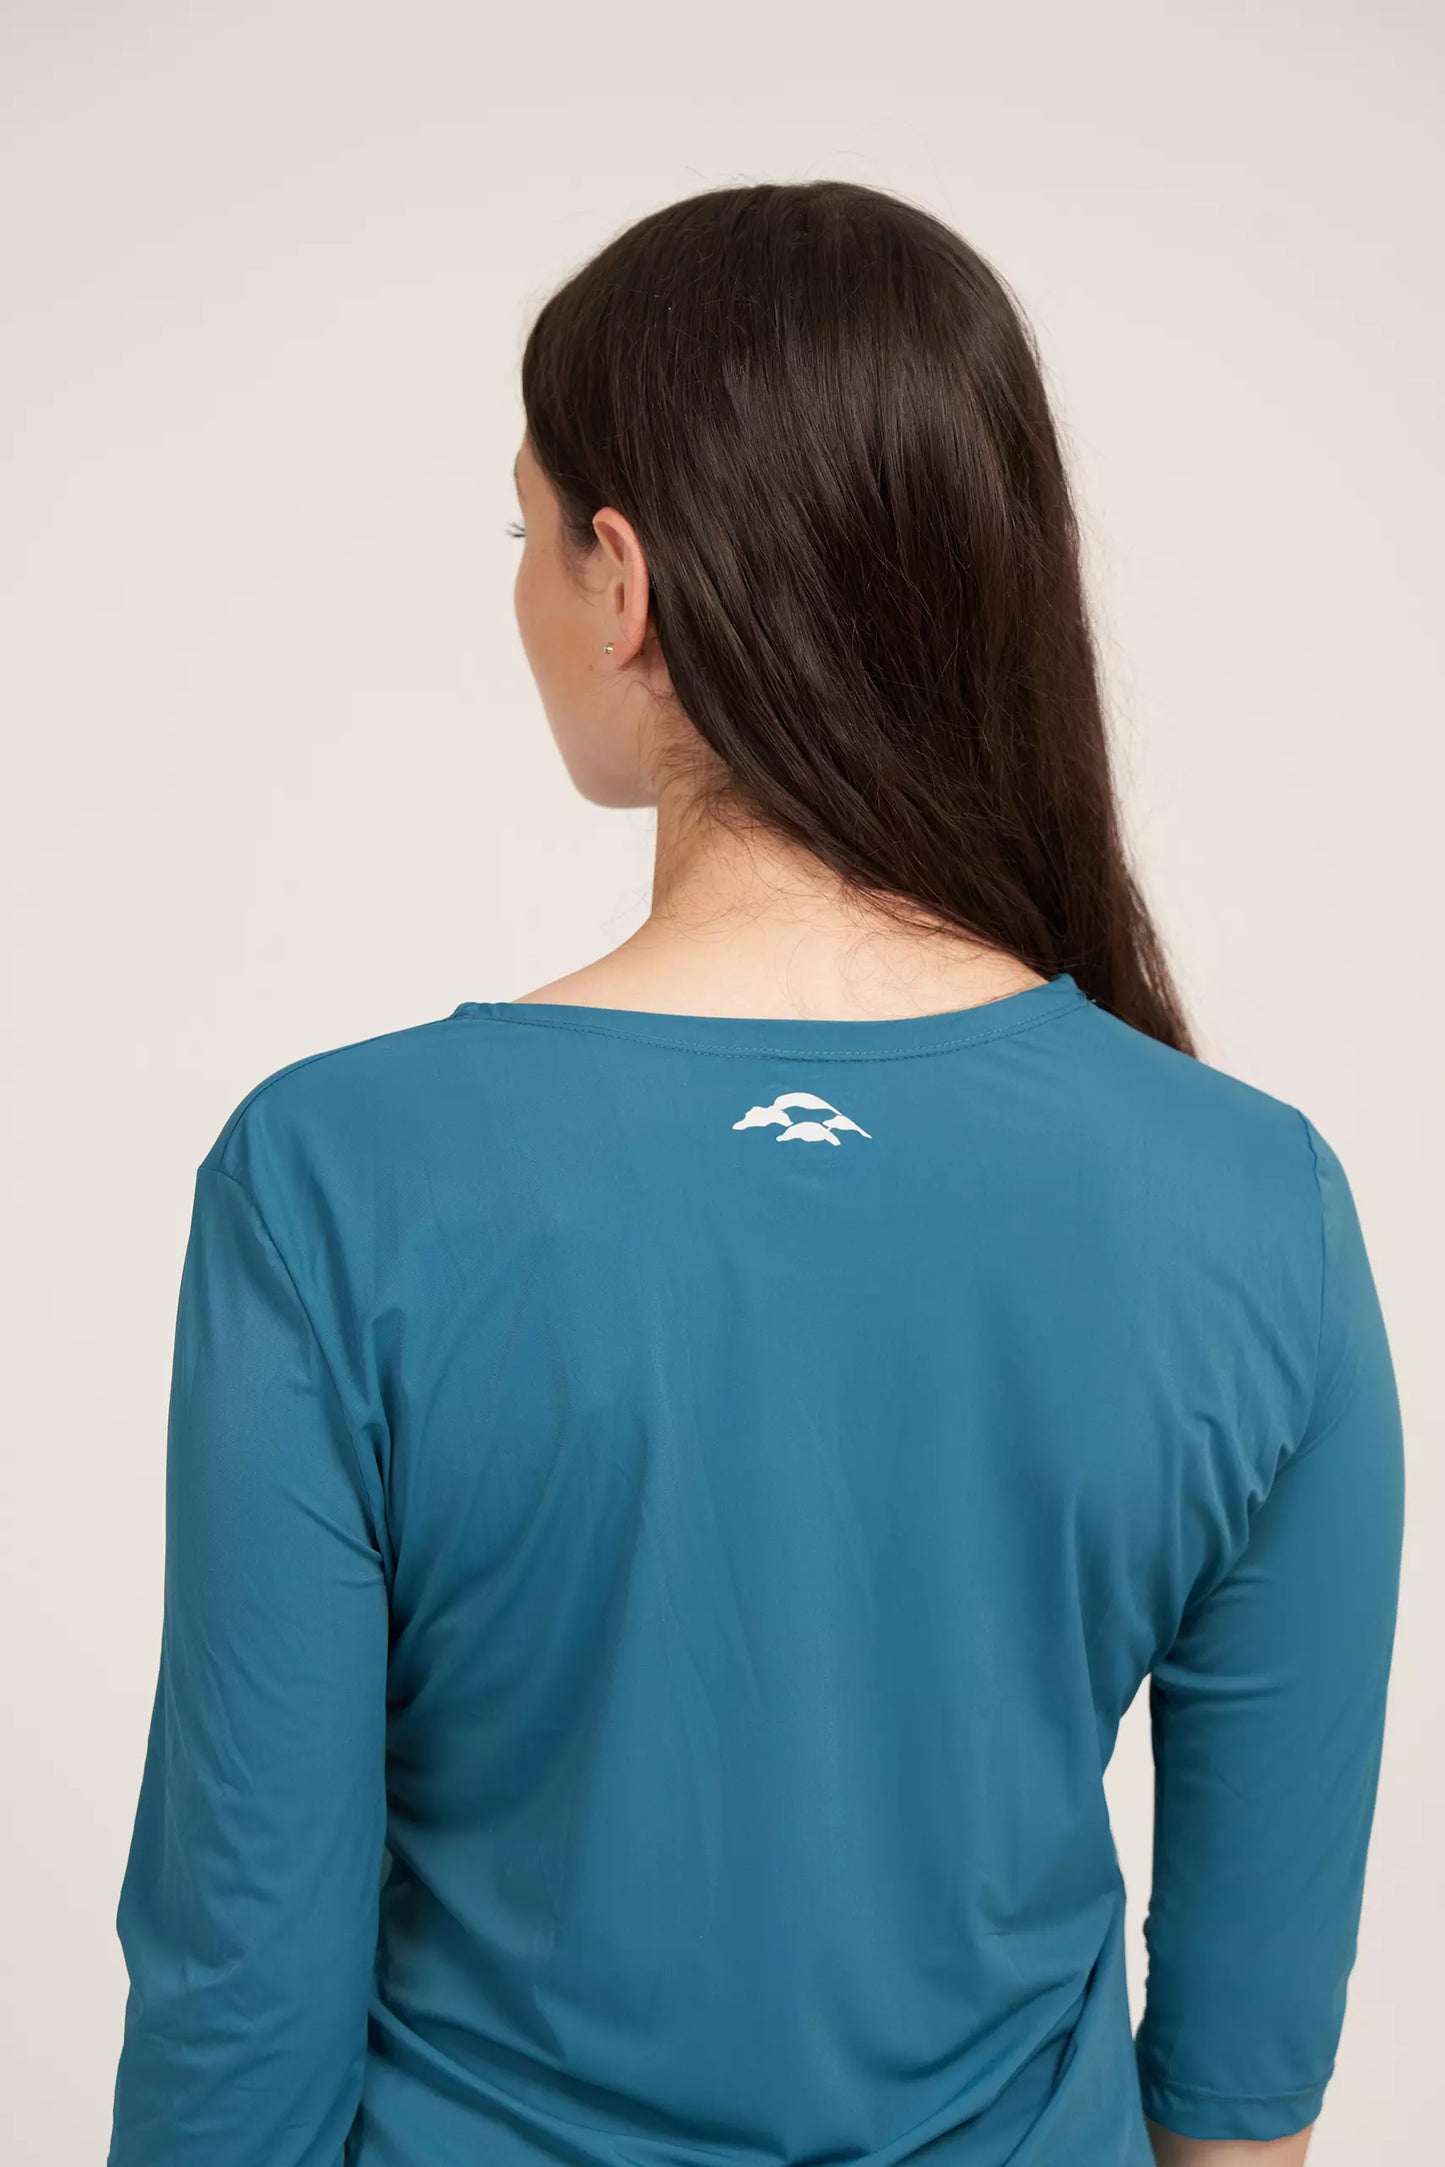 Teal and Sky Exercise Shirt